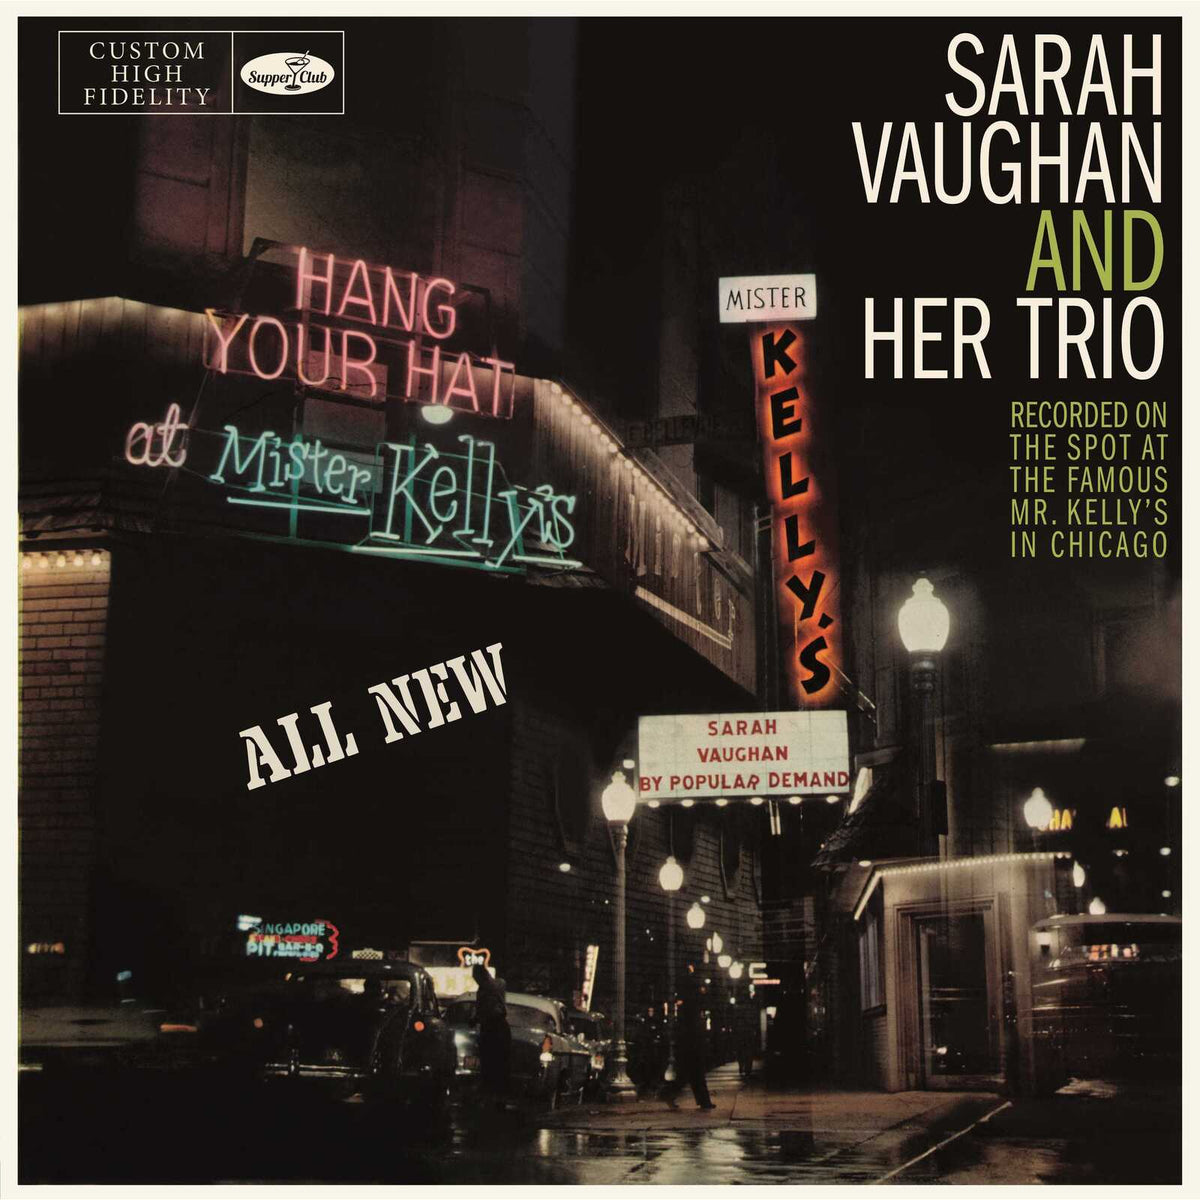 Sarah Vaughan and Her Trio - At Mister Kelly's - 047SP